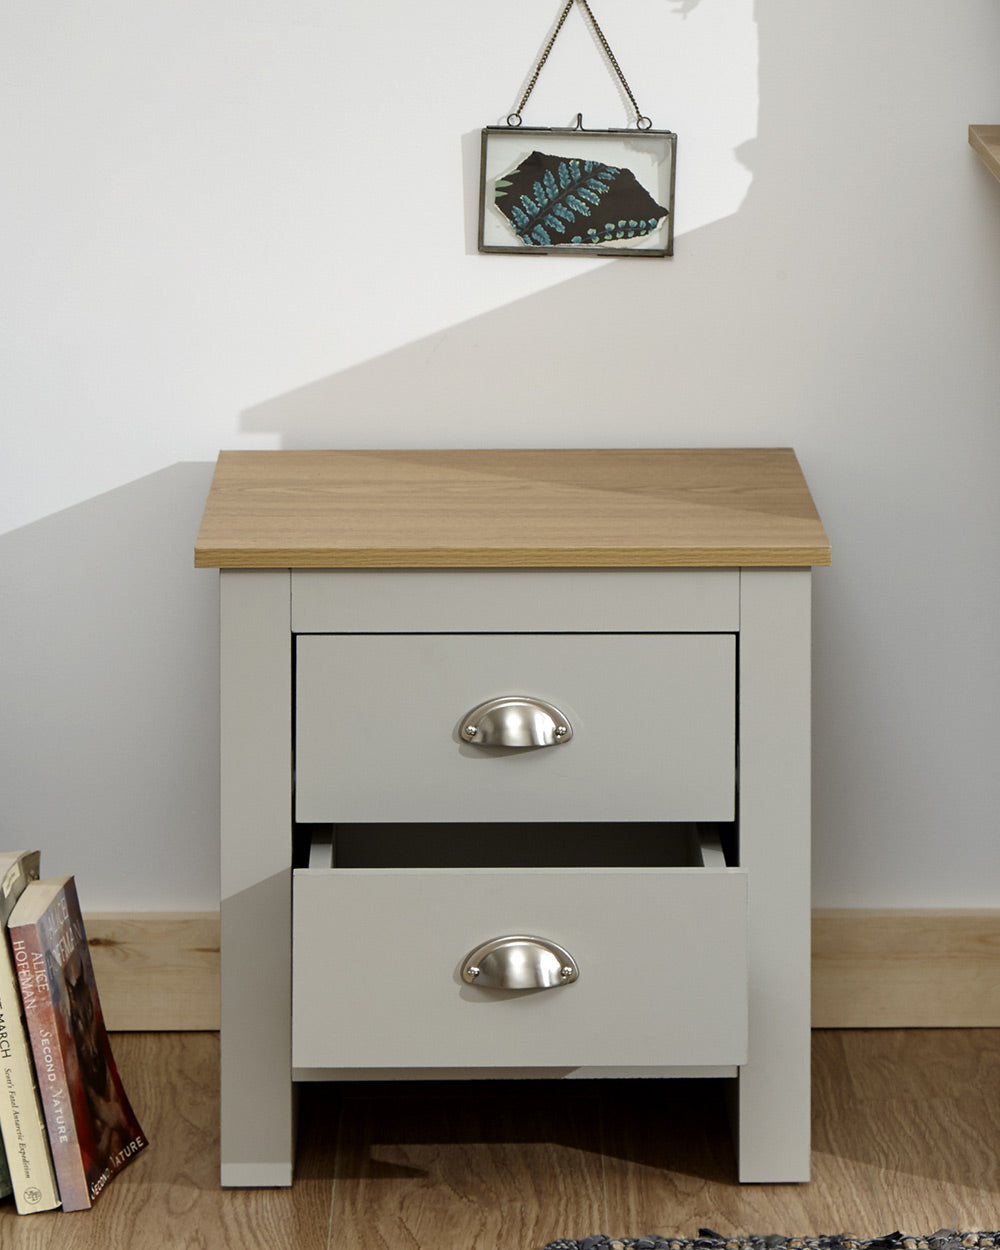 Lancaster 2 drawer bedside table cabinet in a lifestyle scene in a bedroom with the bottom drawer open